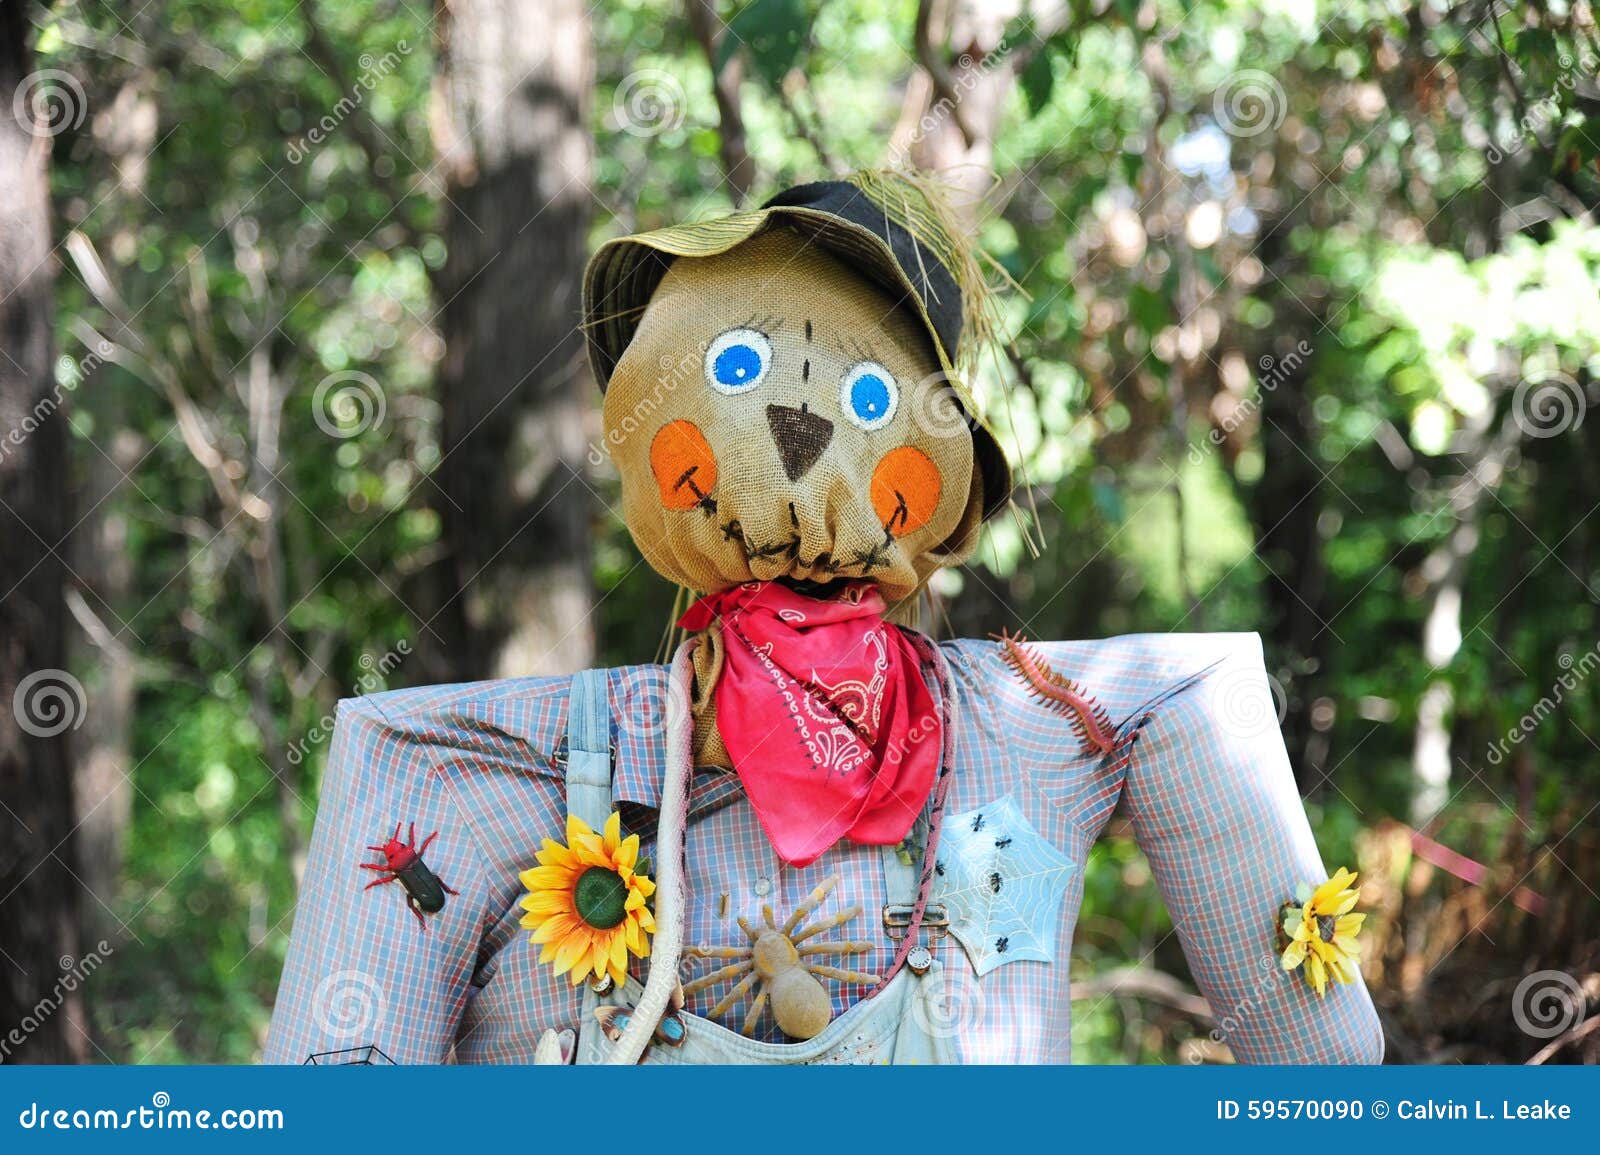 halloween scarecrow in a field.